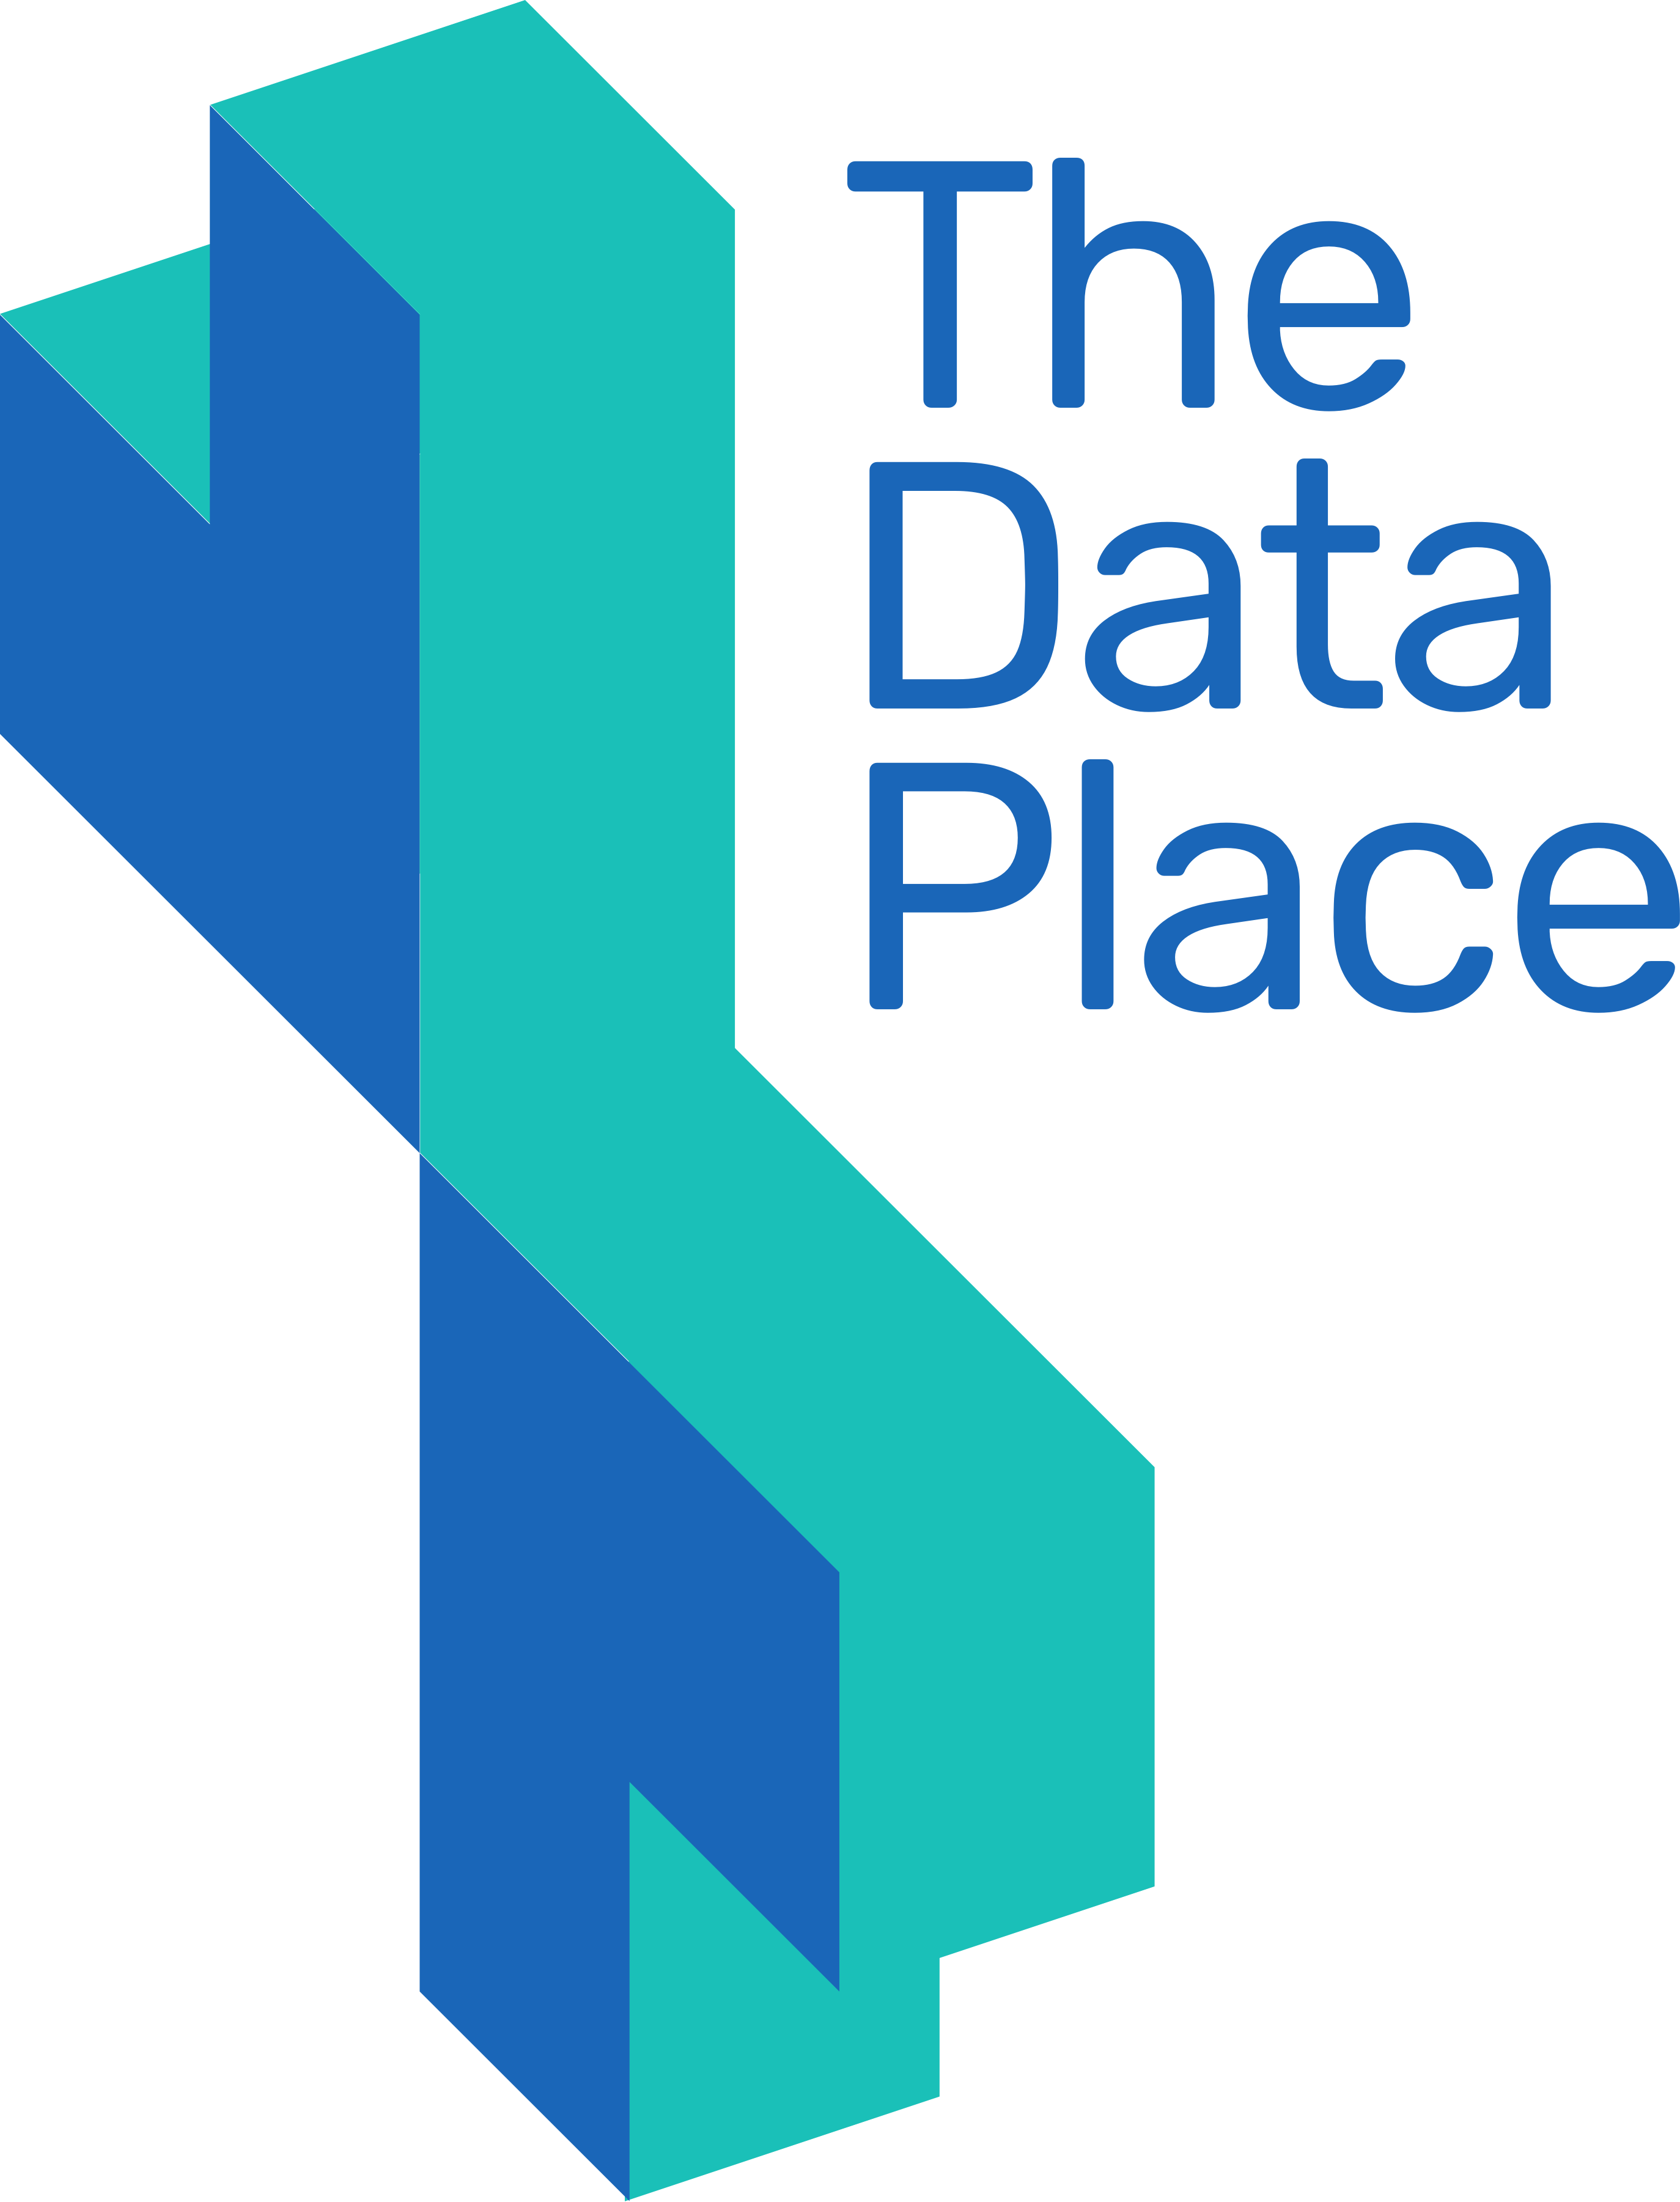 https://thedata.place/